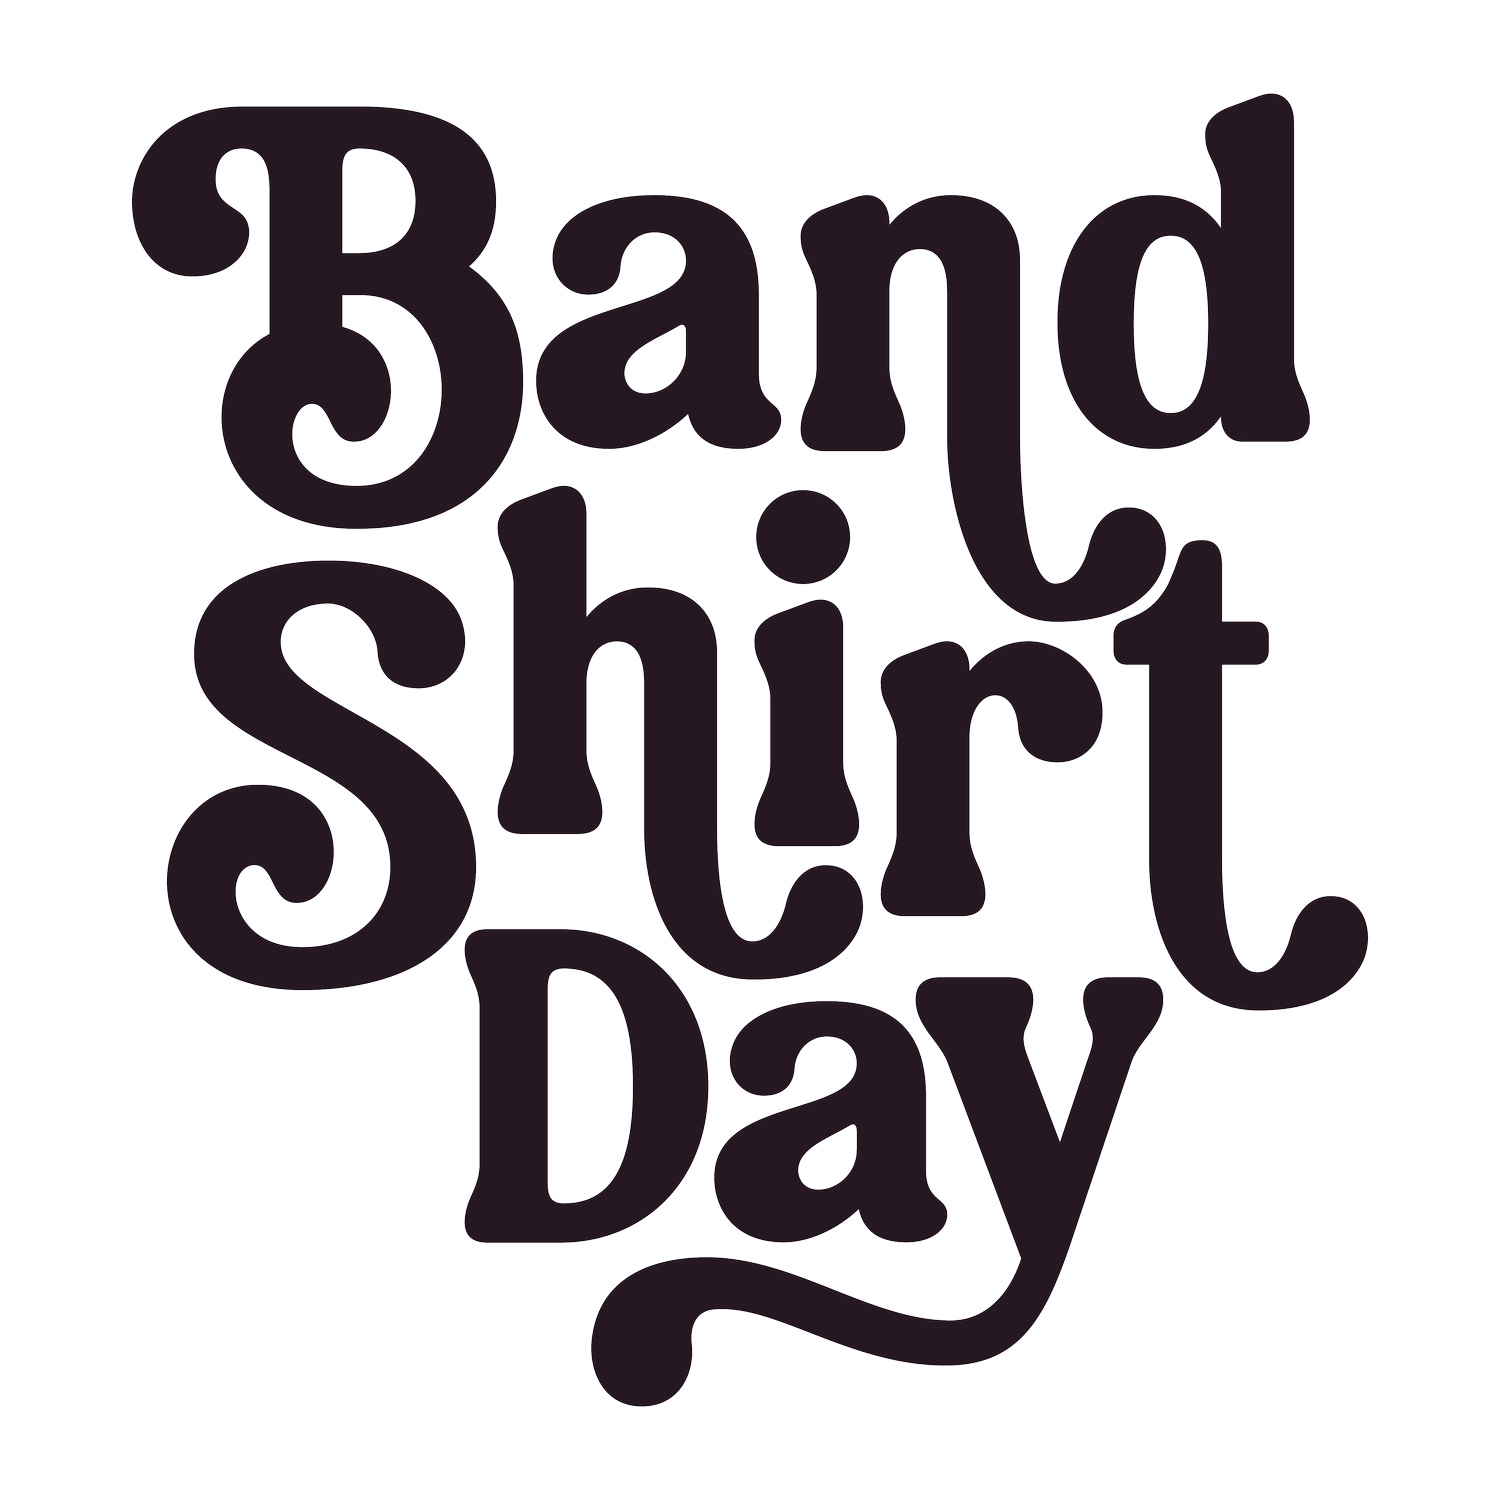 Band Shirt Day is September 15th, 2023